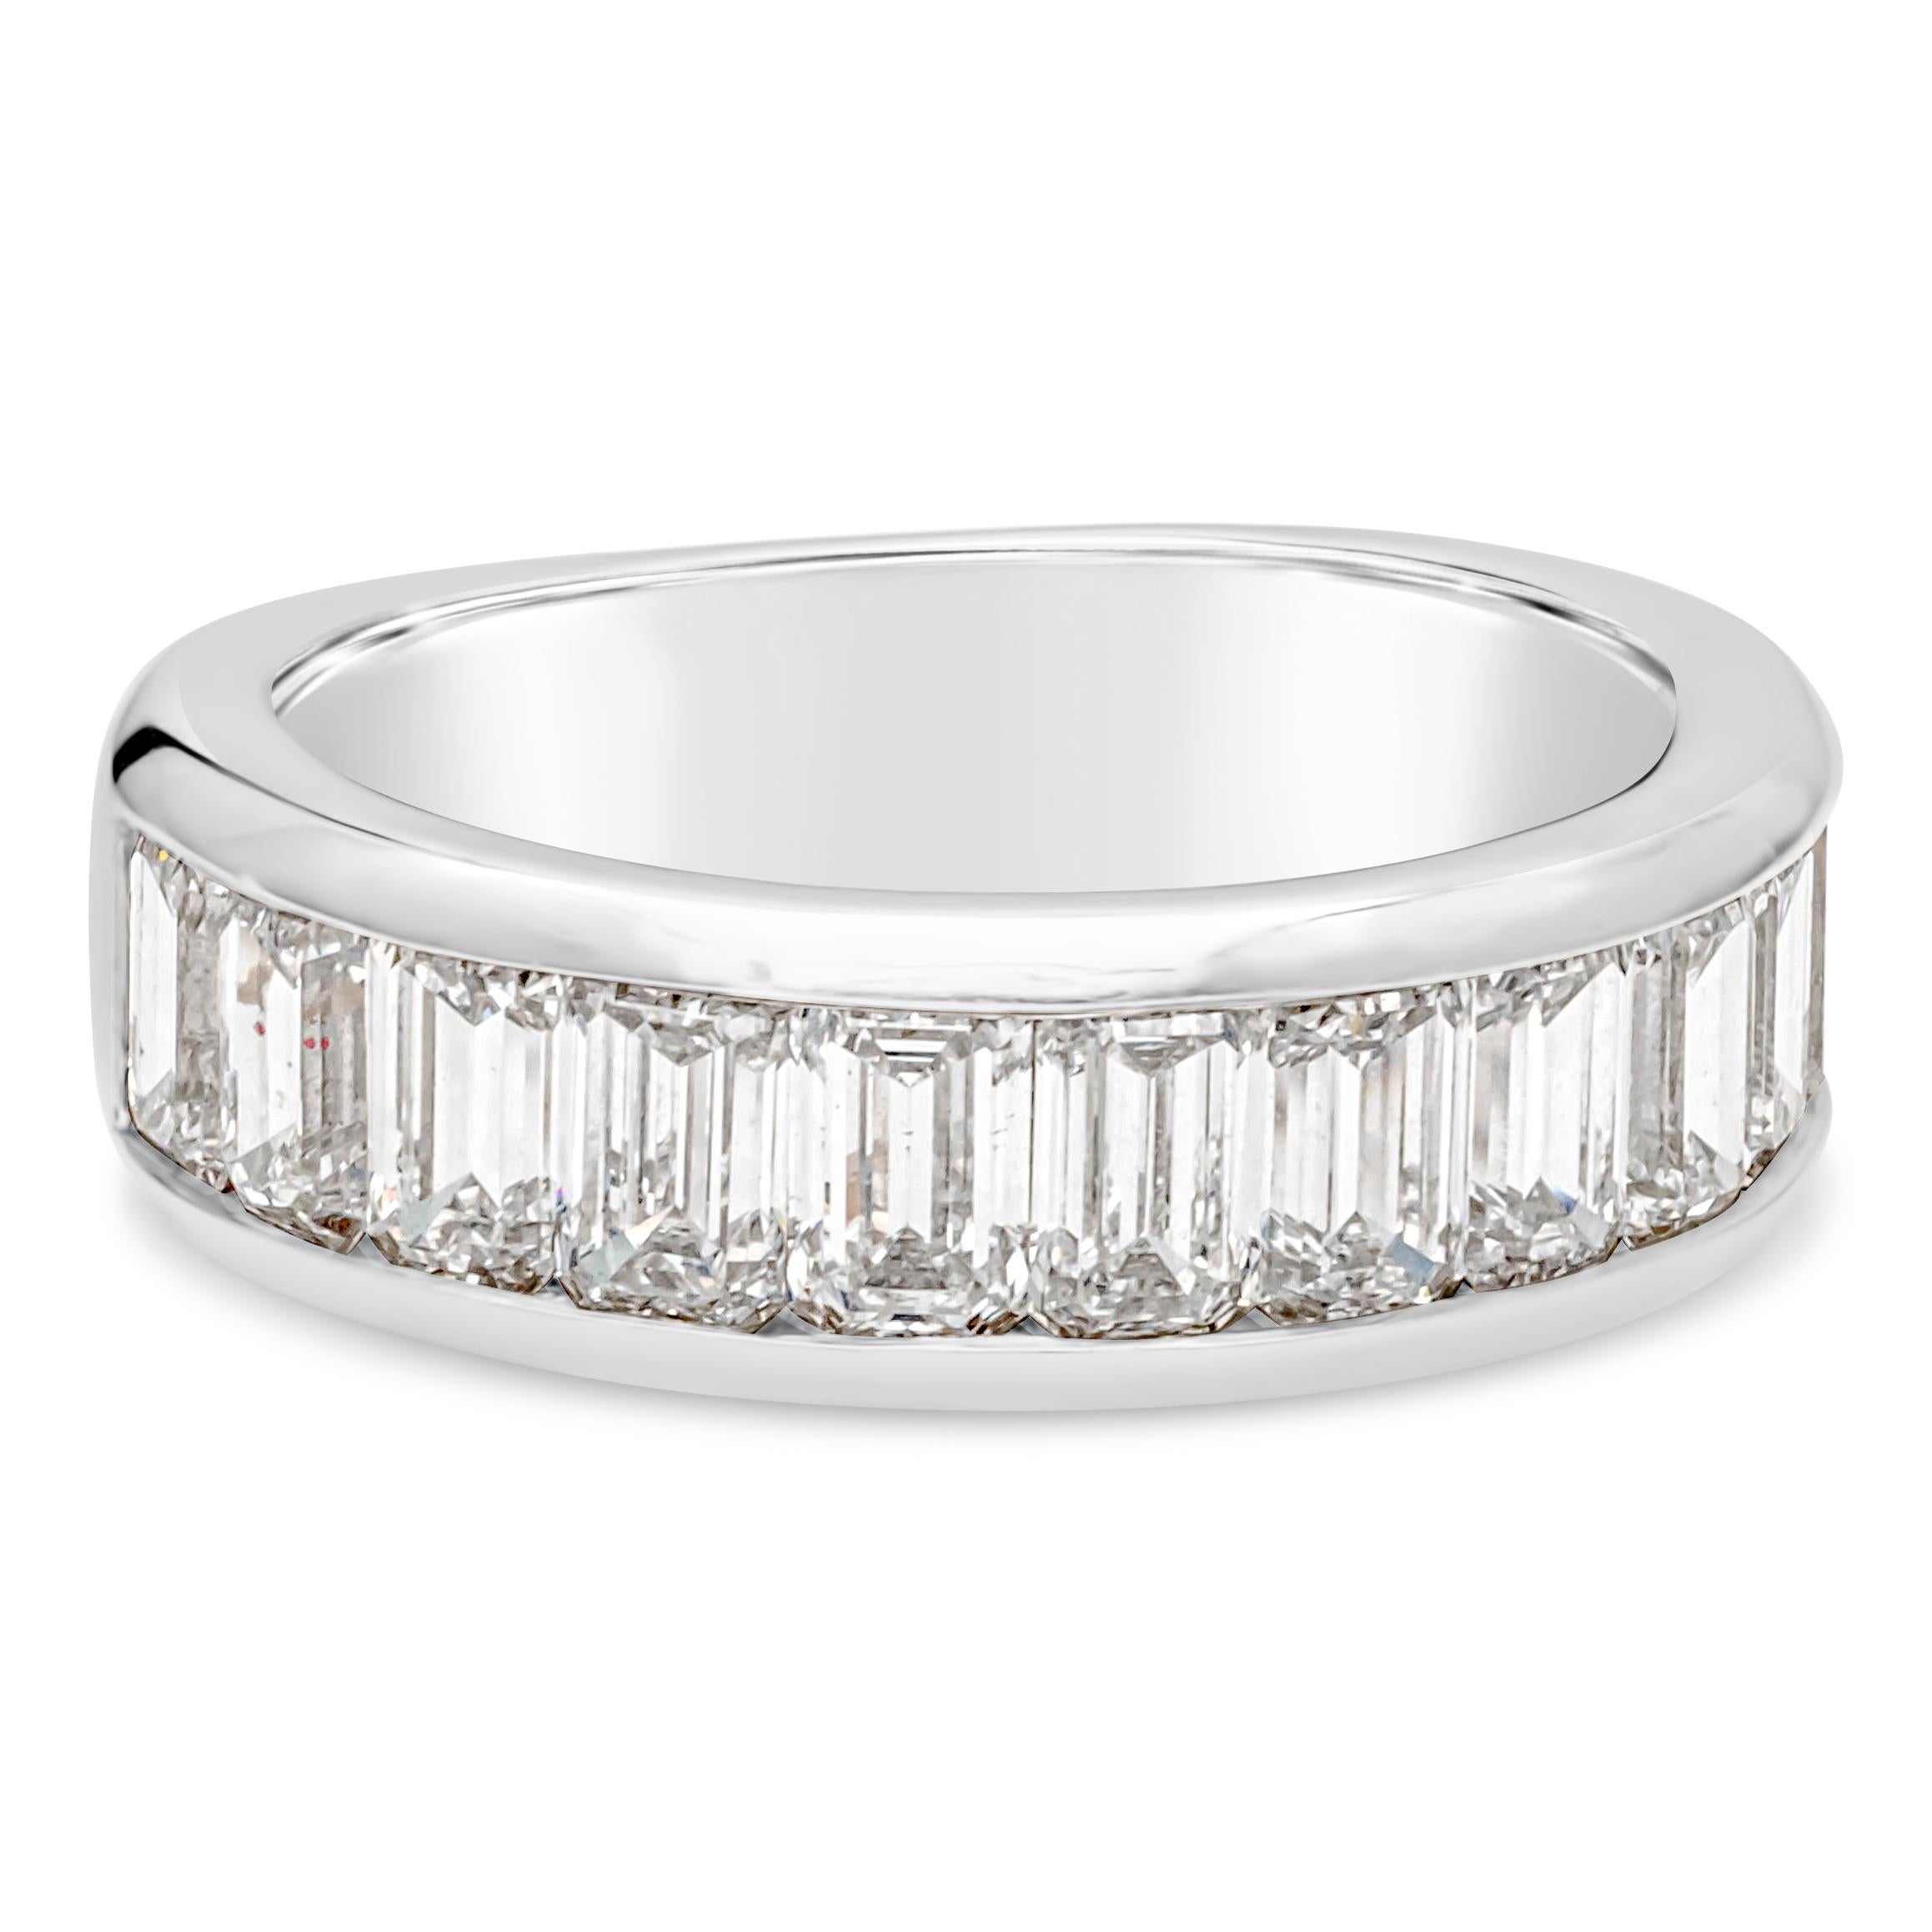 This simple and classy wide wedding band showcasing 11 emerald cut diamonds weighing 2.80 carats total, mounted in a half-way channel setting. Finely made in platinum and Size 6.5 US resizable upon request. G-H color VS-VVS clarity

Style available